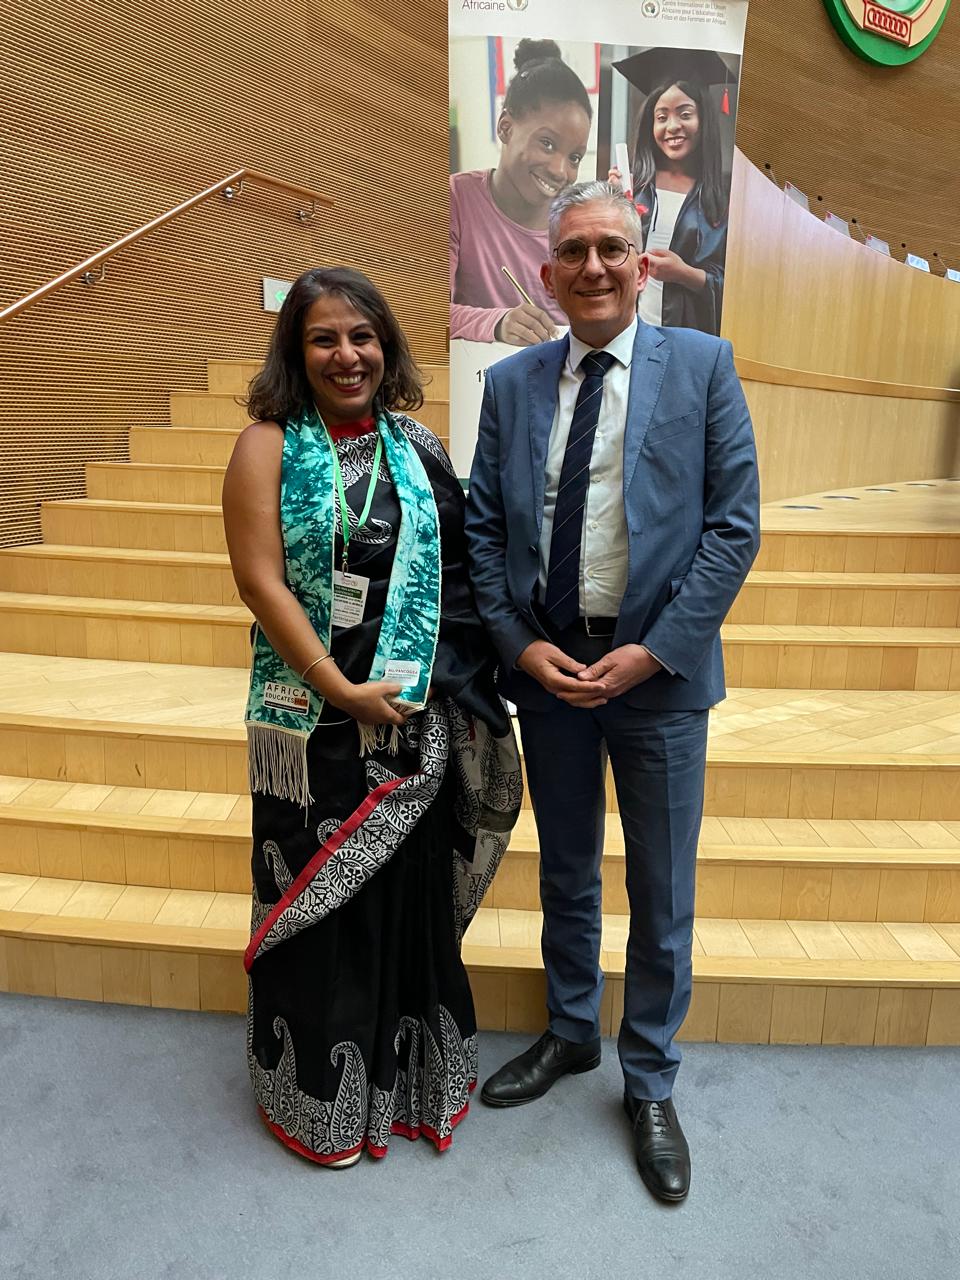 Antara Ganguli from UN Girls’ Education Initiative and Claude Blévin from Embassy of France in Ethiopia